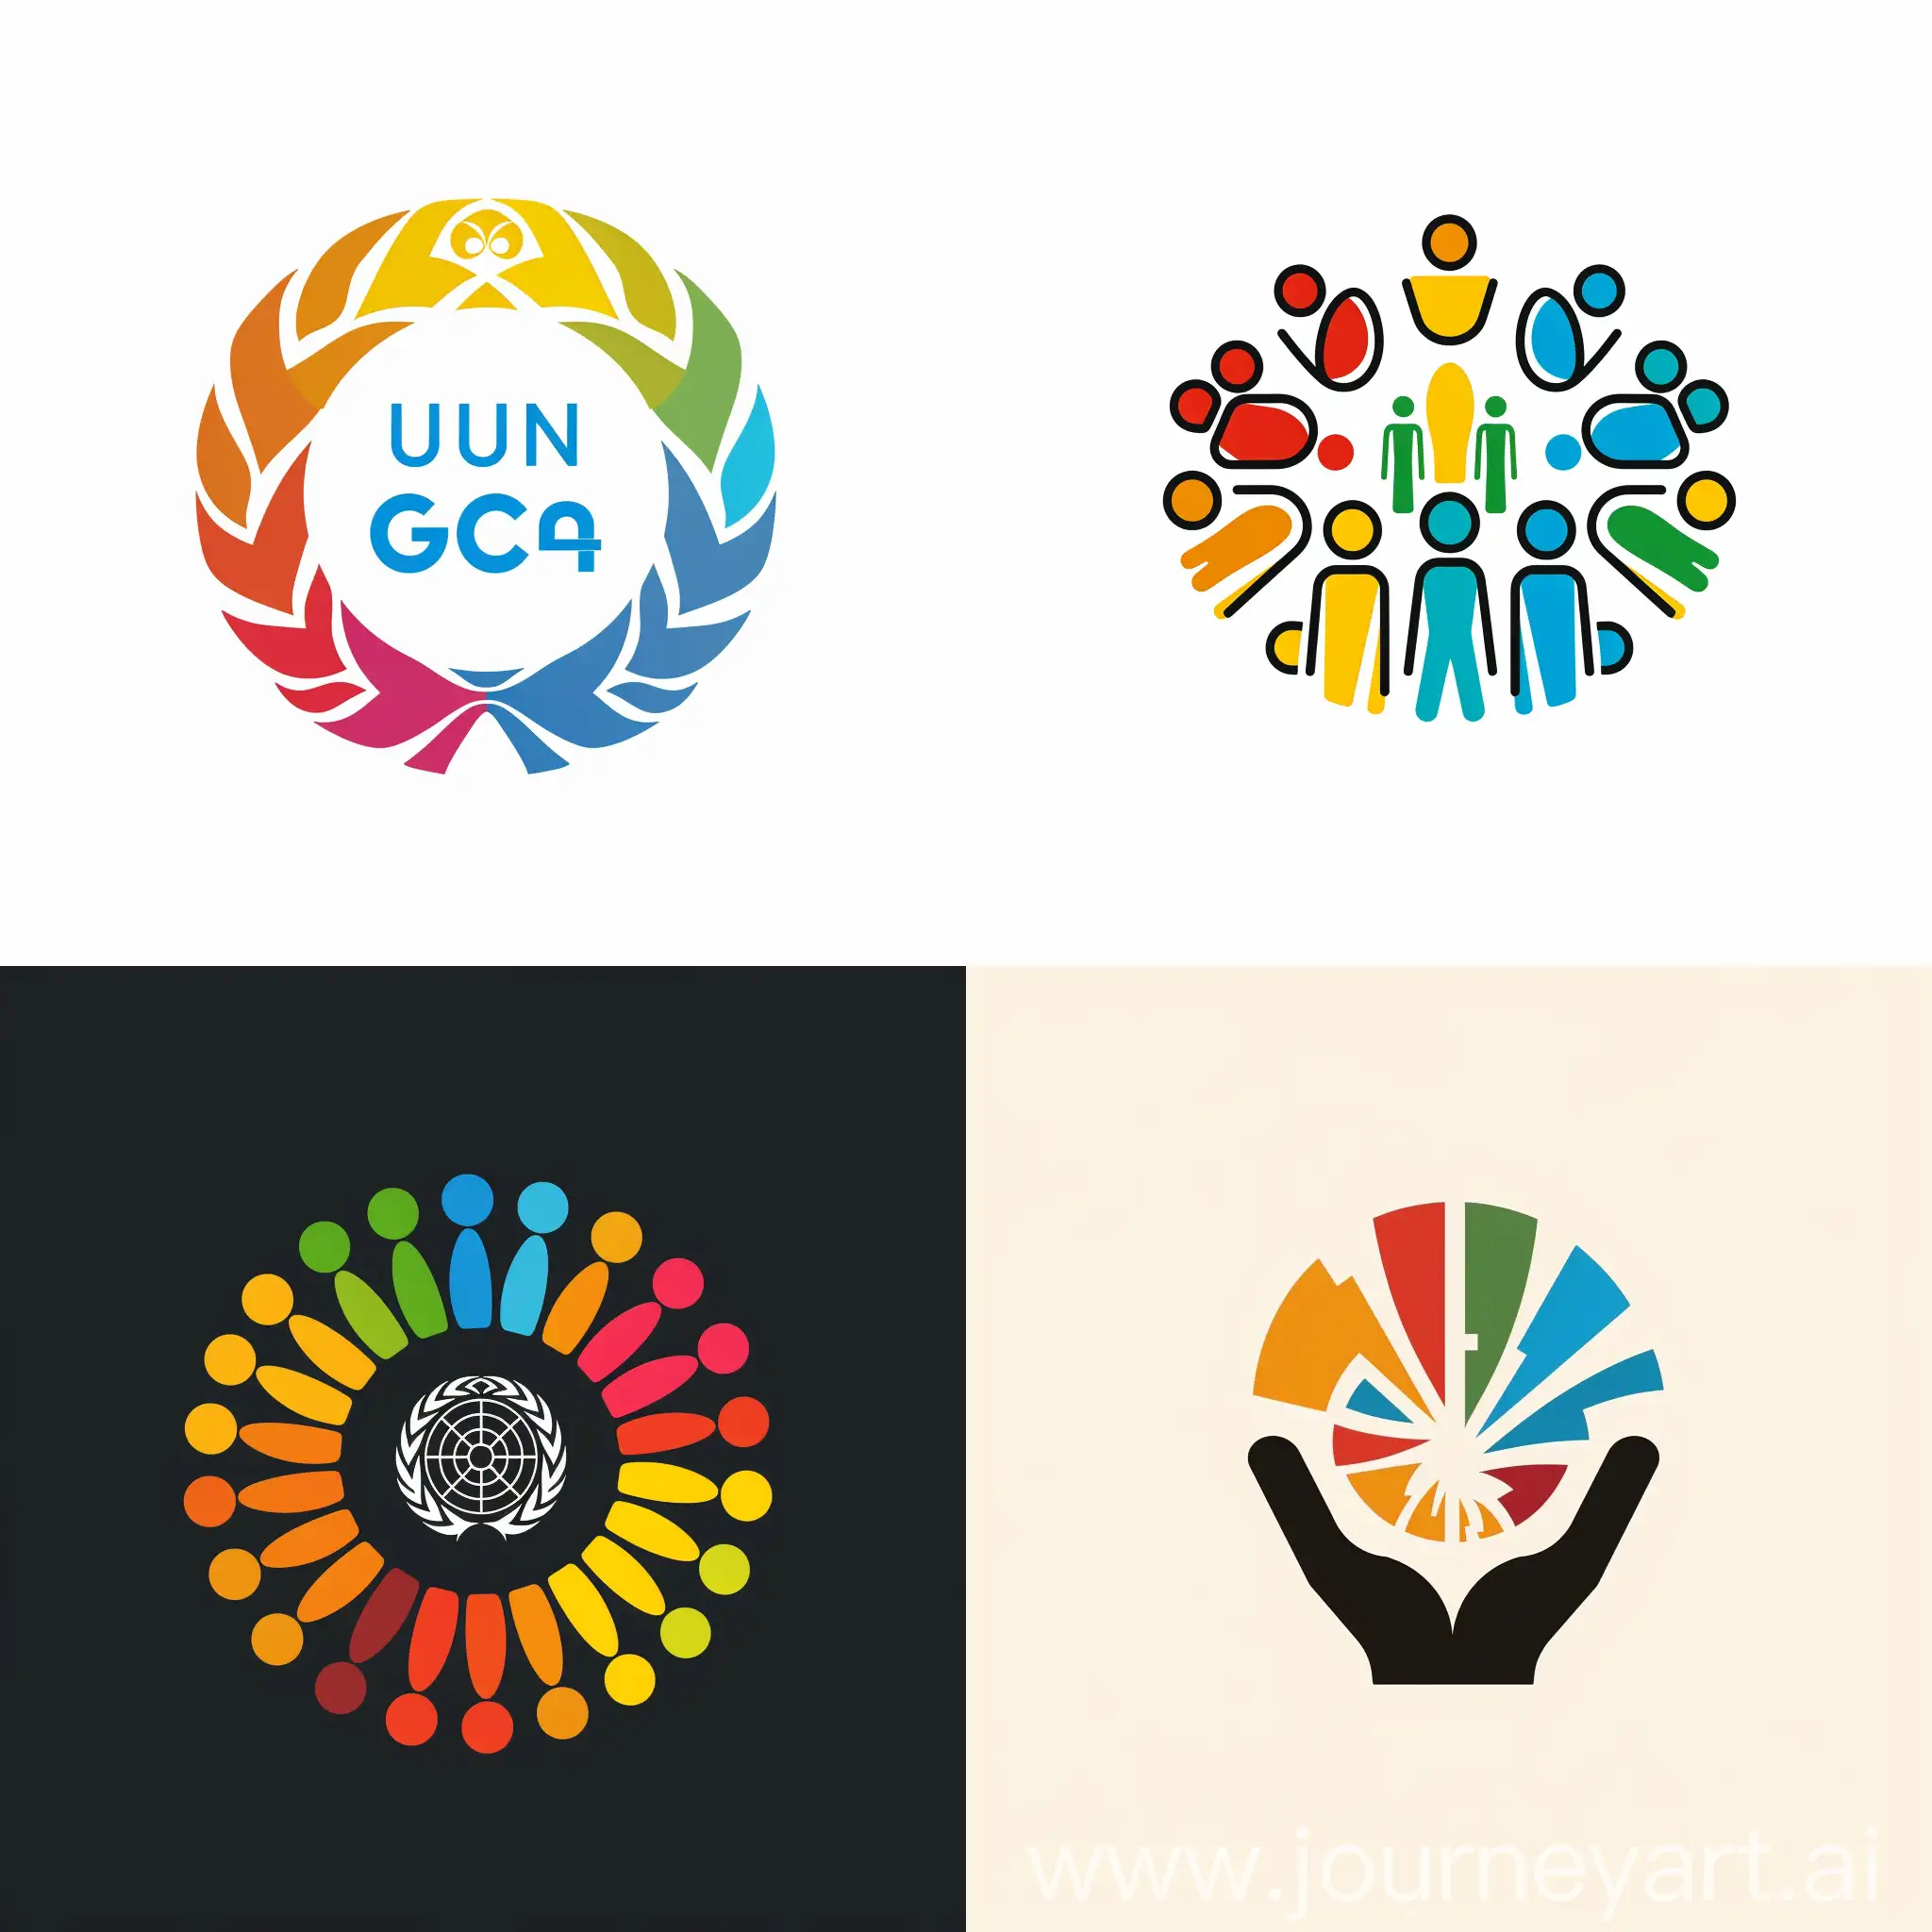 "The Sustainable Development Ambassadors Program" logo design competition seeks original designs that align with Sustainable Development Goals (SDGs) and UN branding guidelines. Designs should celebrate diversity, be clear and simple, use appropriate colors, and have universal appeal. Submissions must include color and black-and-white versions in vector format, emailed by the deadline. The winning design will become the program's official logo, with the designer receiving a prize and recognition. Participants must agree to allow unrestricted use of their work.